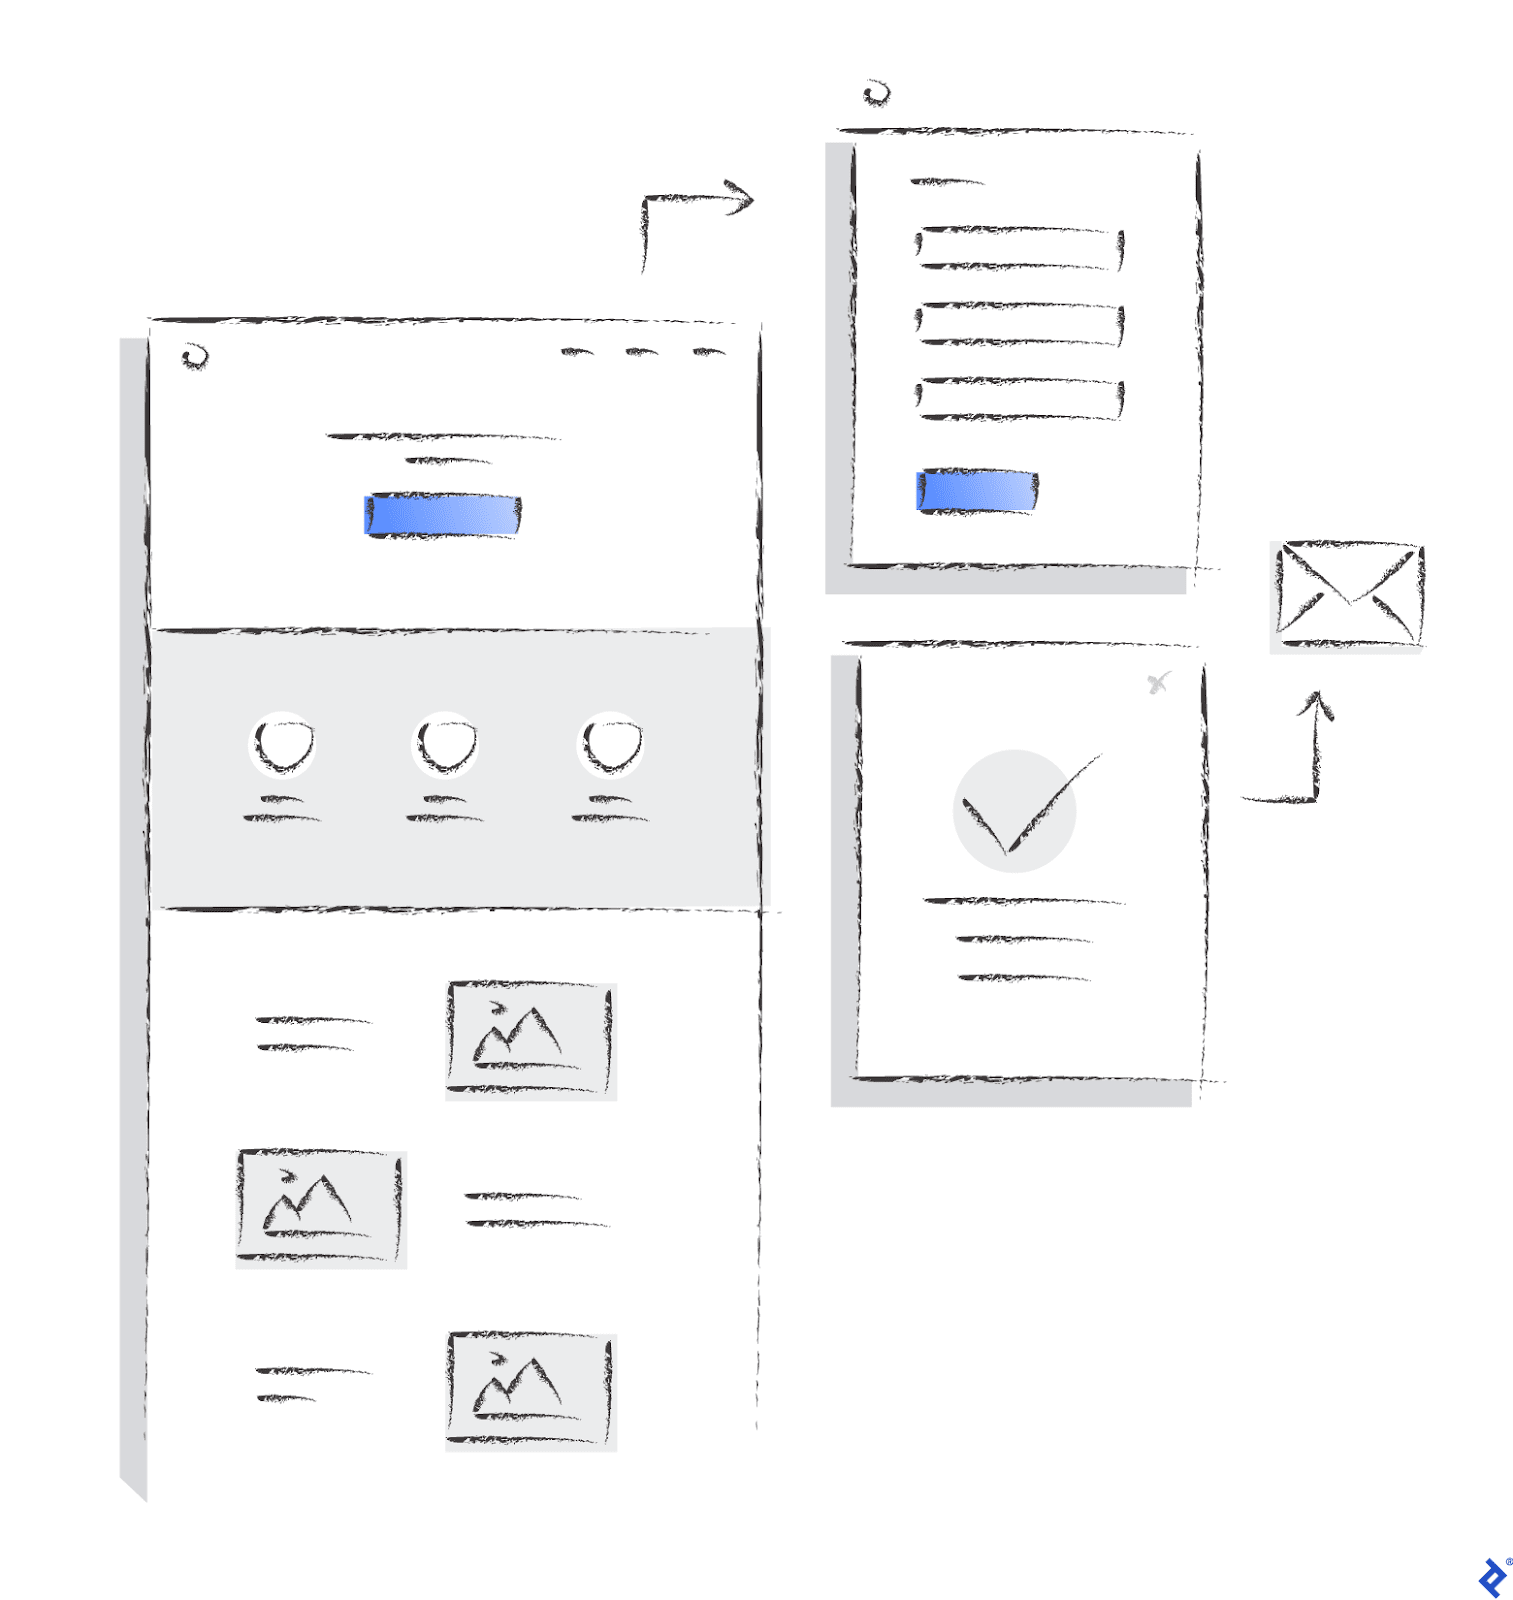 Sketches show how designers begin to structure content on a page.